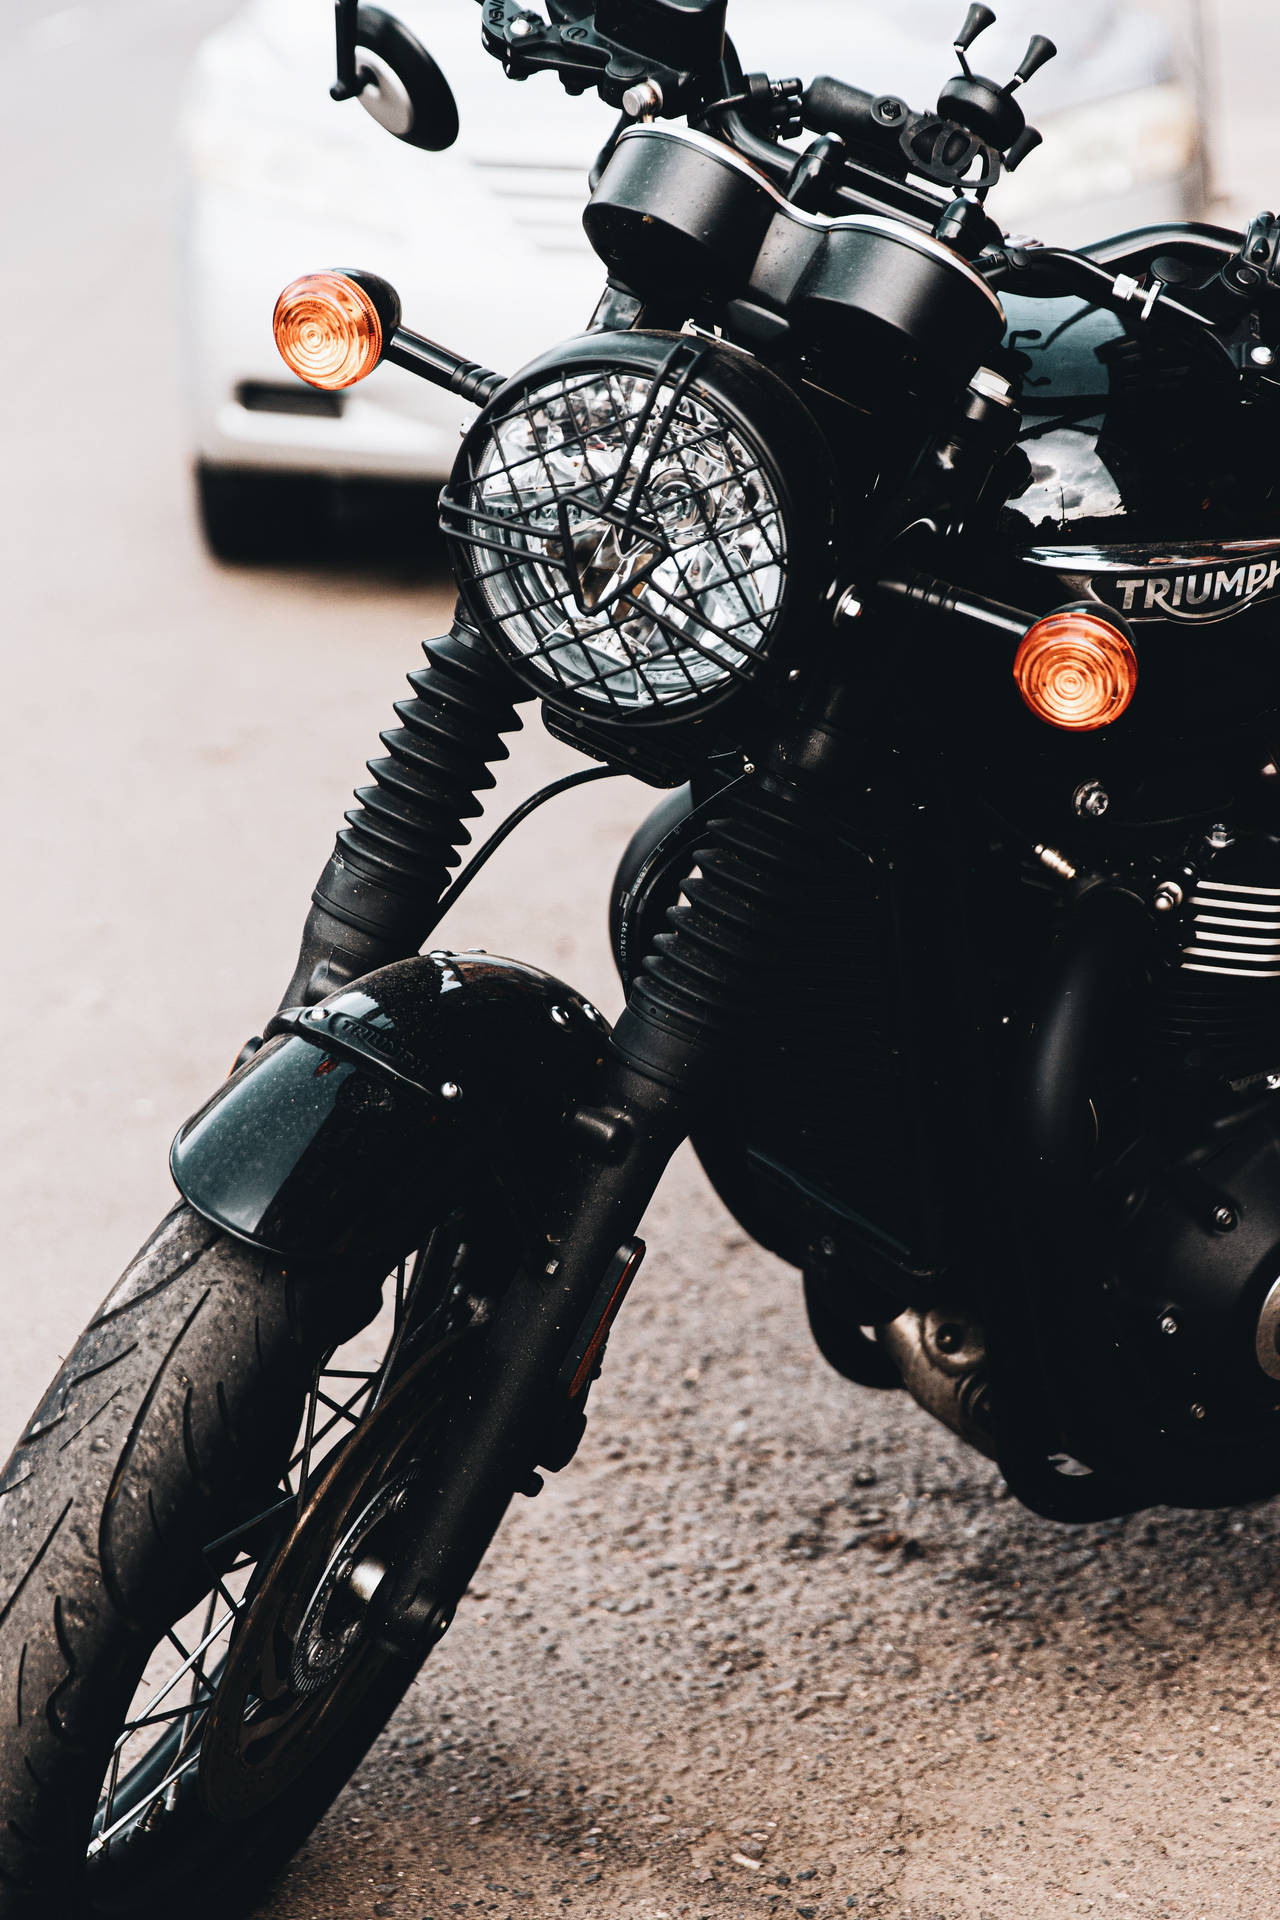 Motorcycle 3659X5489 Wallpaper and Background Image